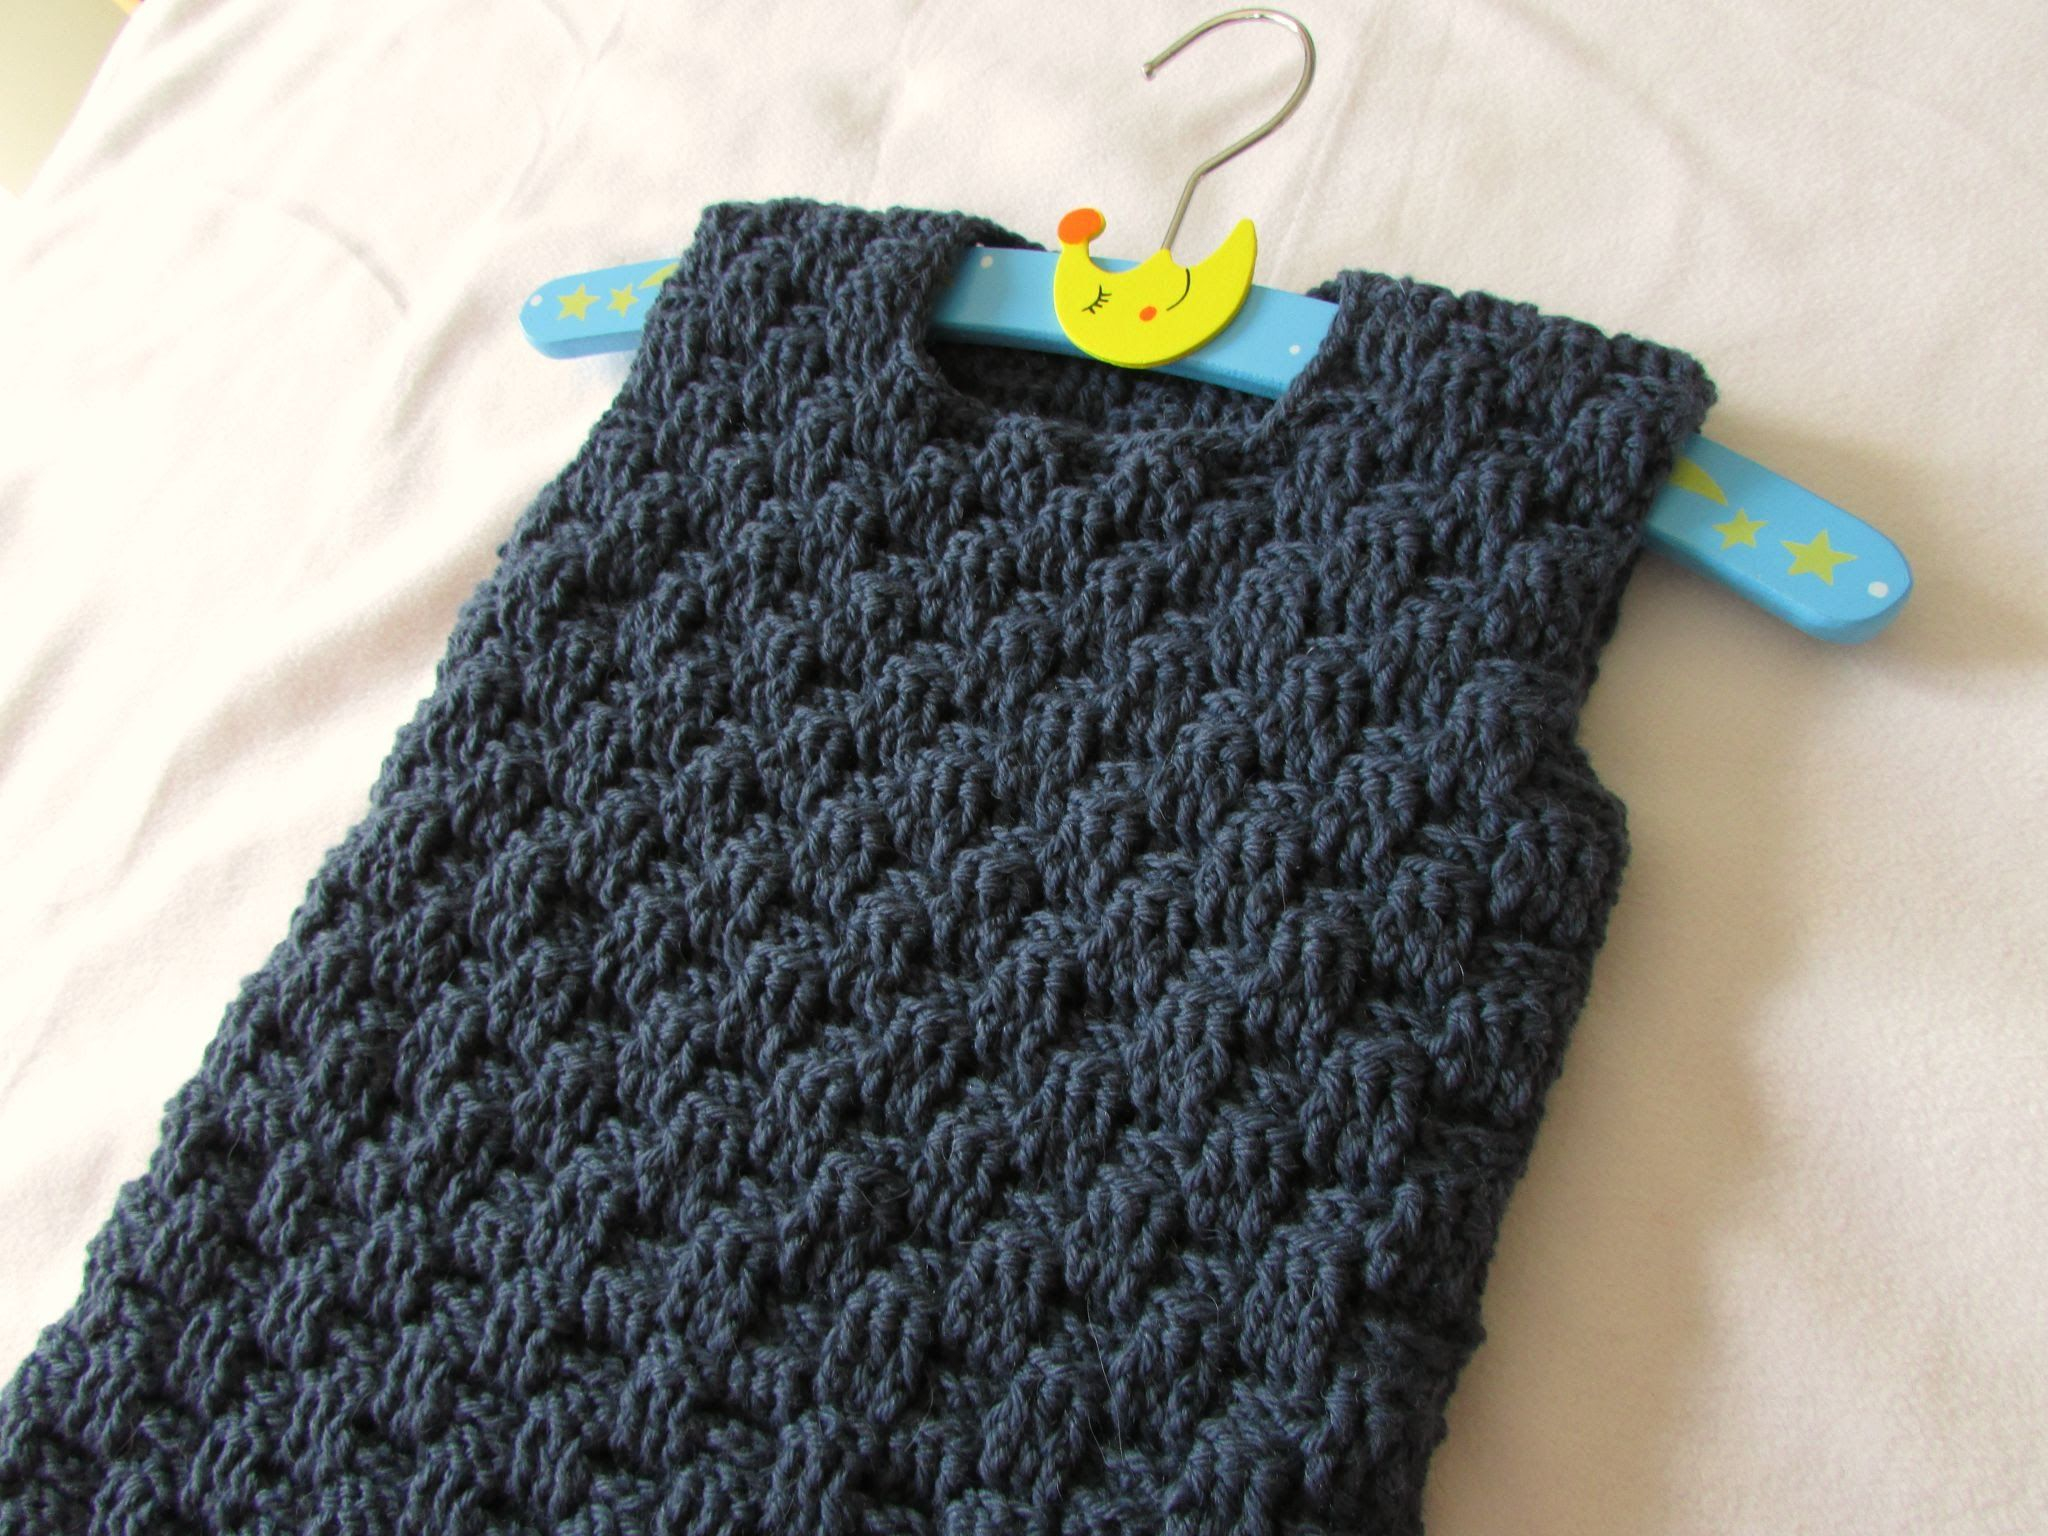 Easy Basket Weave Crochet Pattern This Step Step Tutorial Will Show You How To Crochet An Easy